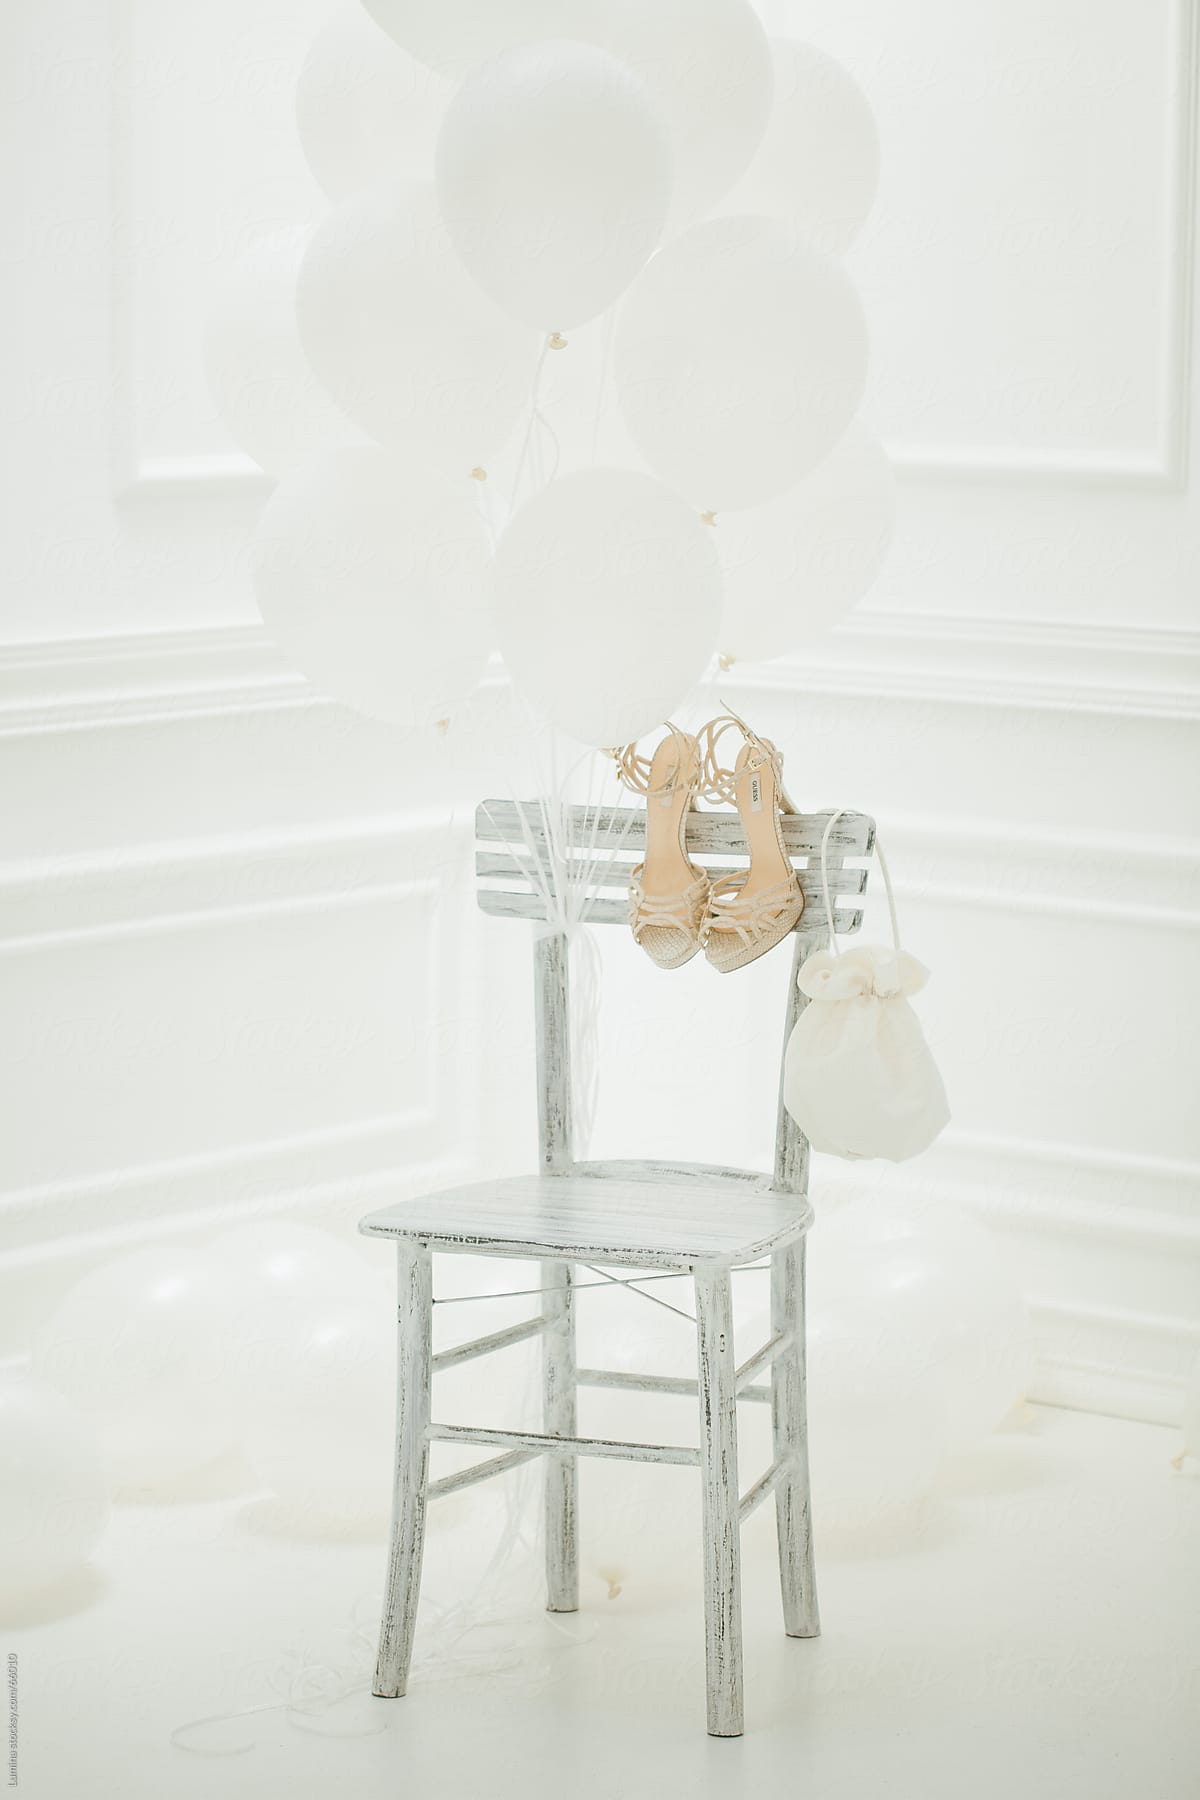 Bride's Shoes and Purse on a White Chair